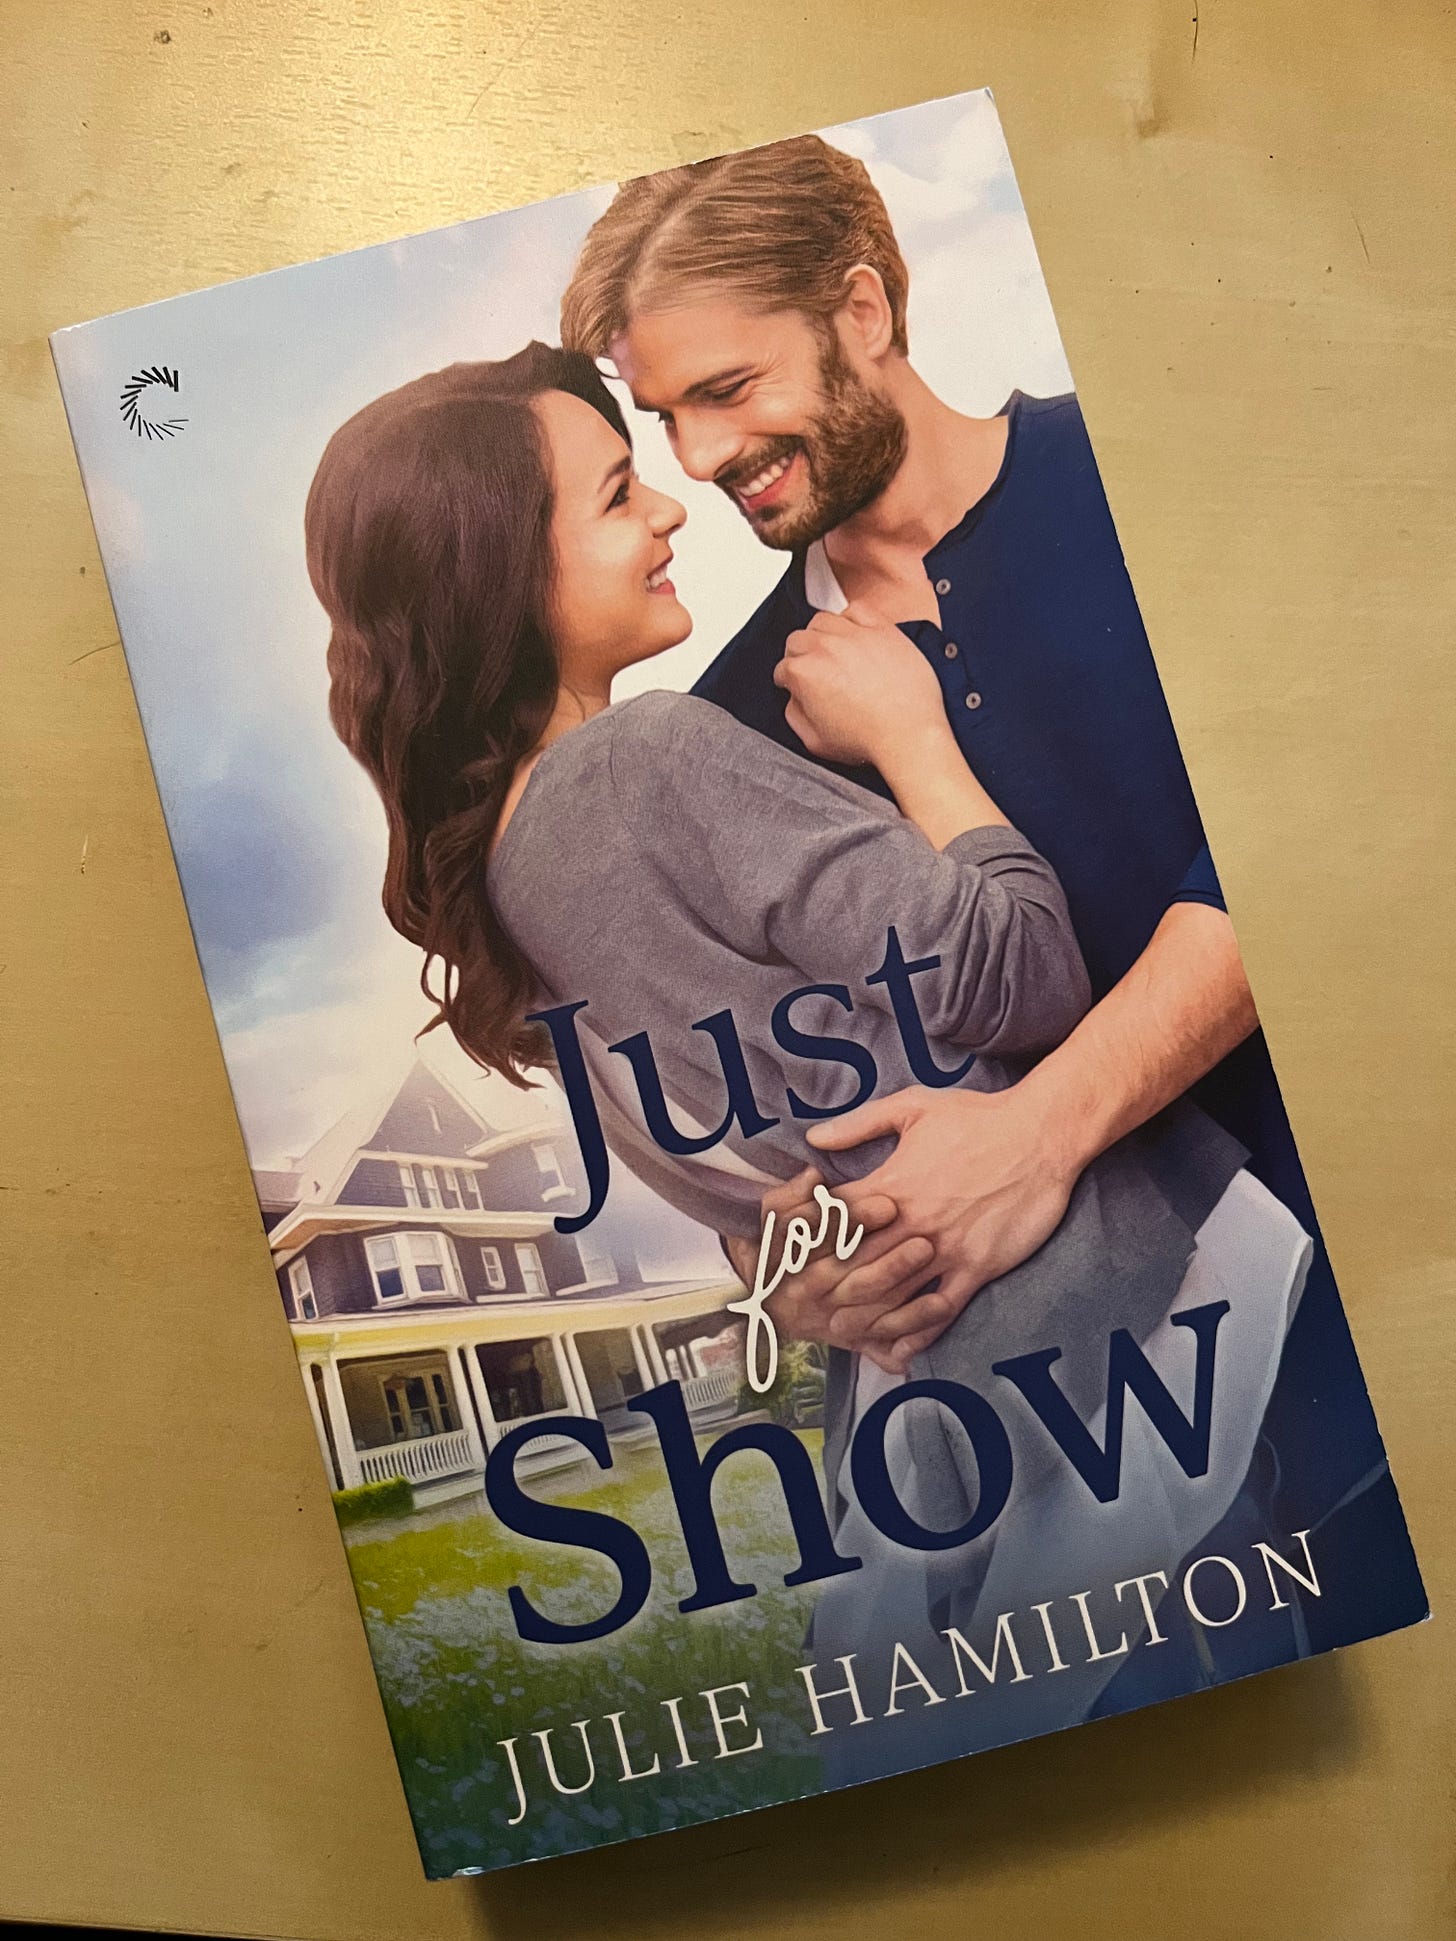 Picture of copy of JUST FOR SHOW by Julie Hamilton on top of a wooden desk, where the cover shows a white couple embracing in front of an old house behind them.